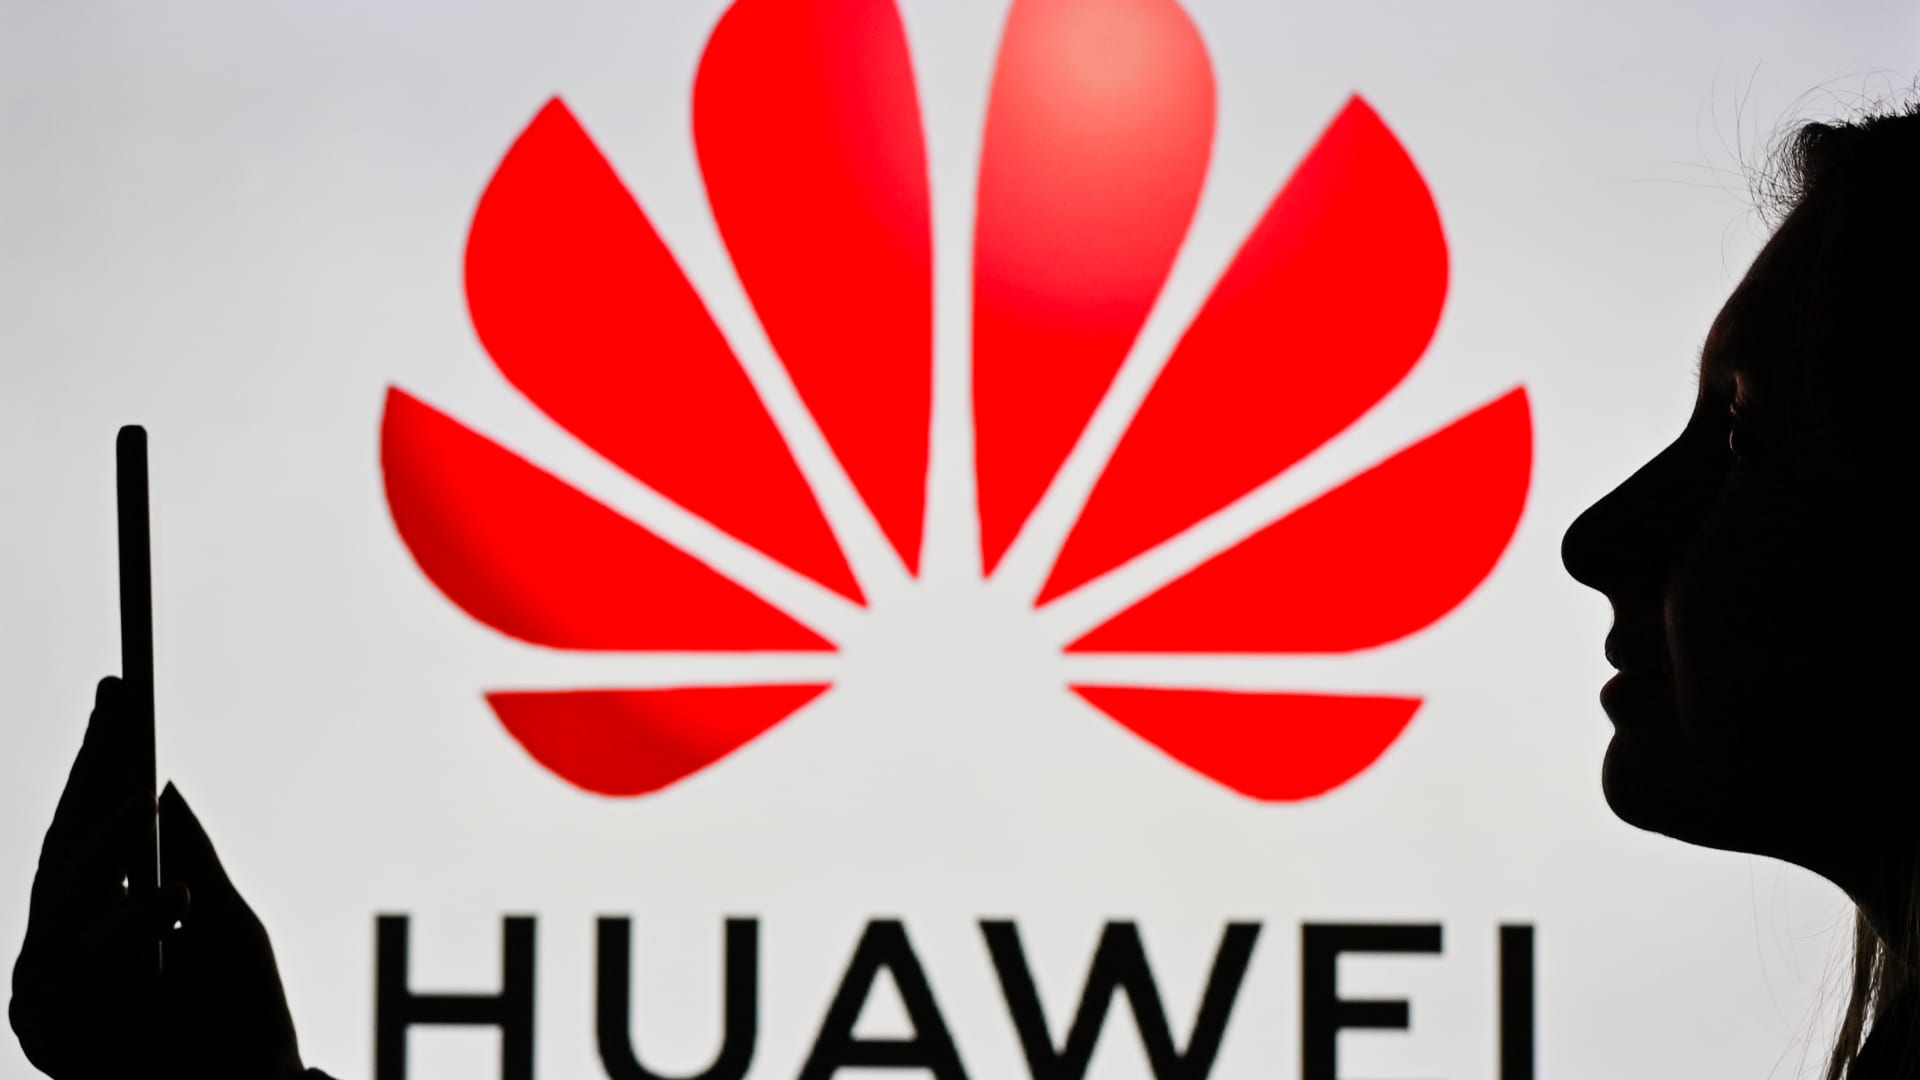 Huawei licenses 5G patents to rival as U.S. sanctions force the Chinese giant to seek new revenue